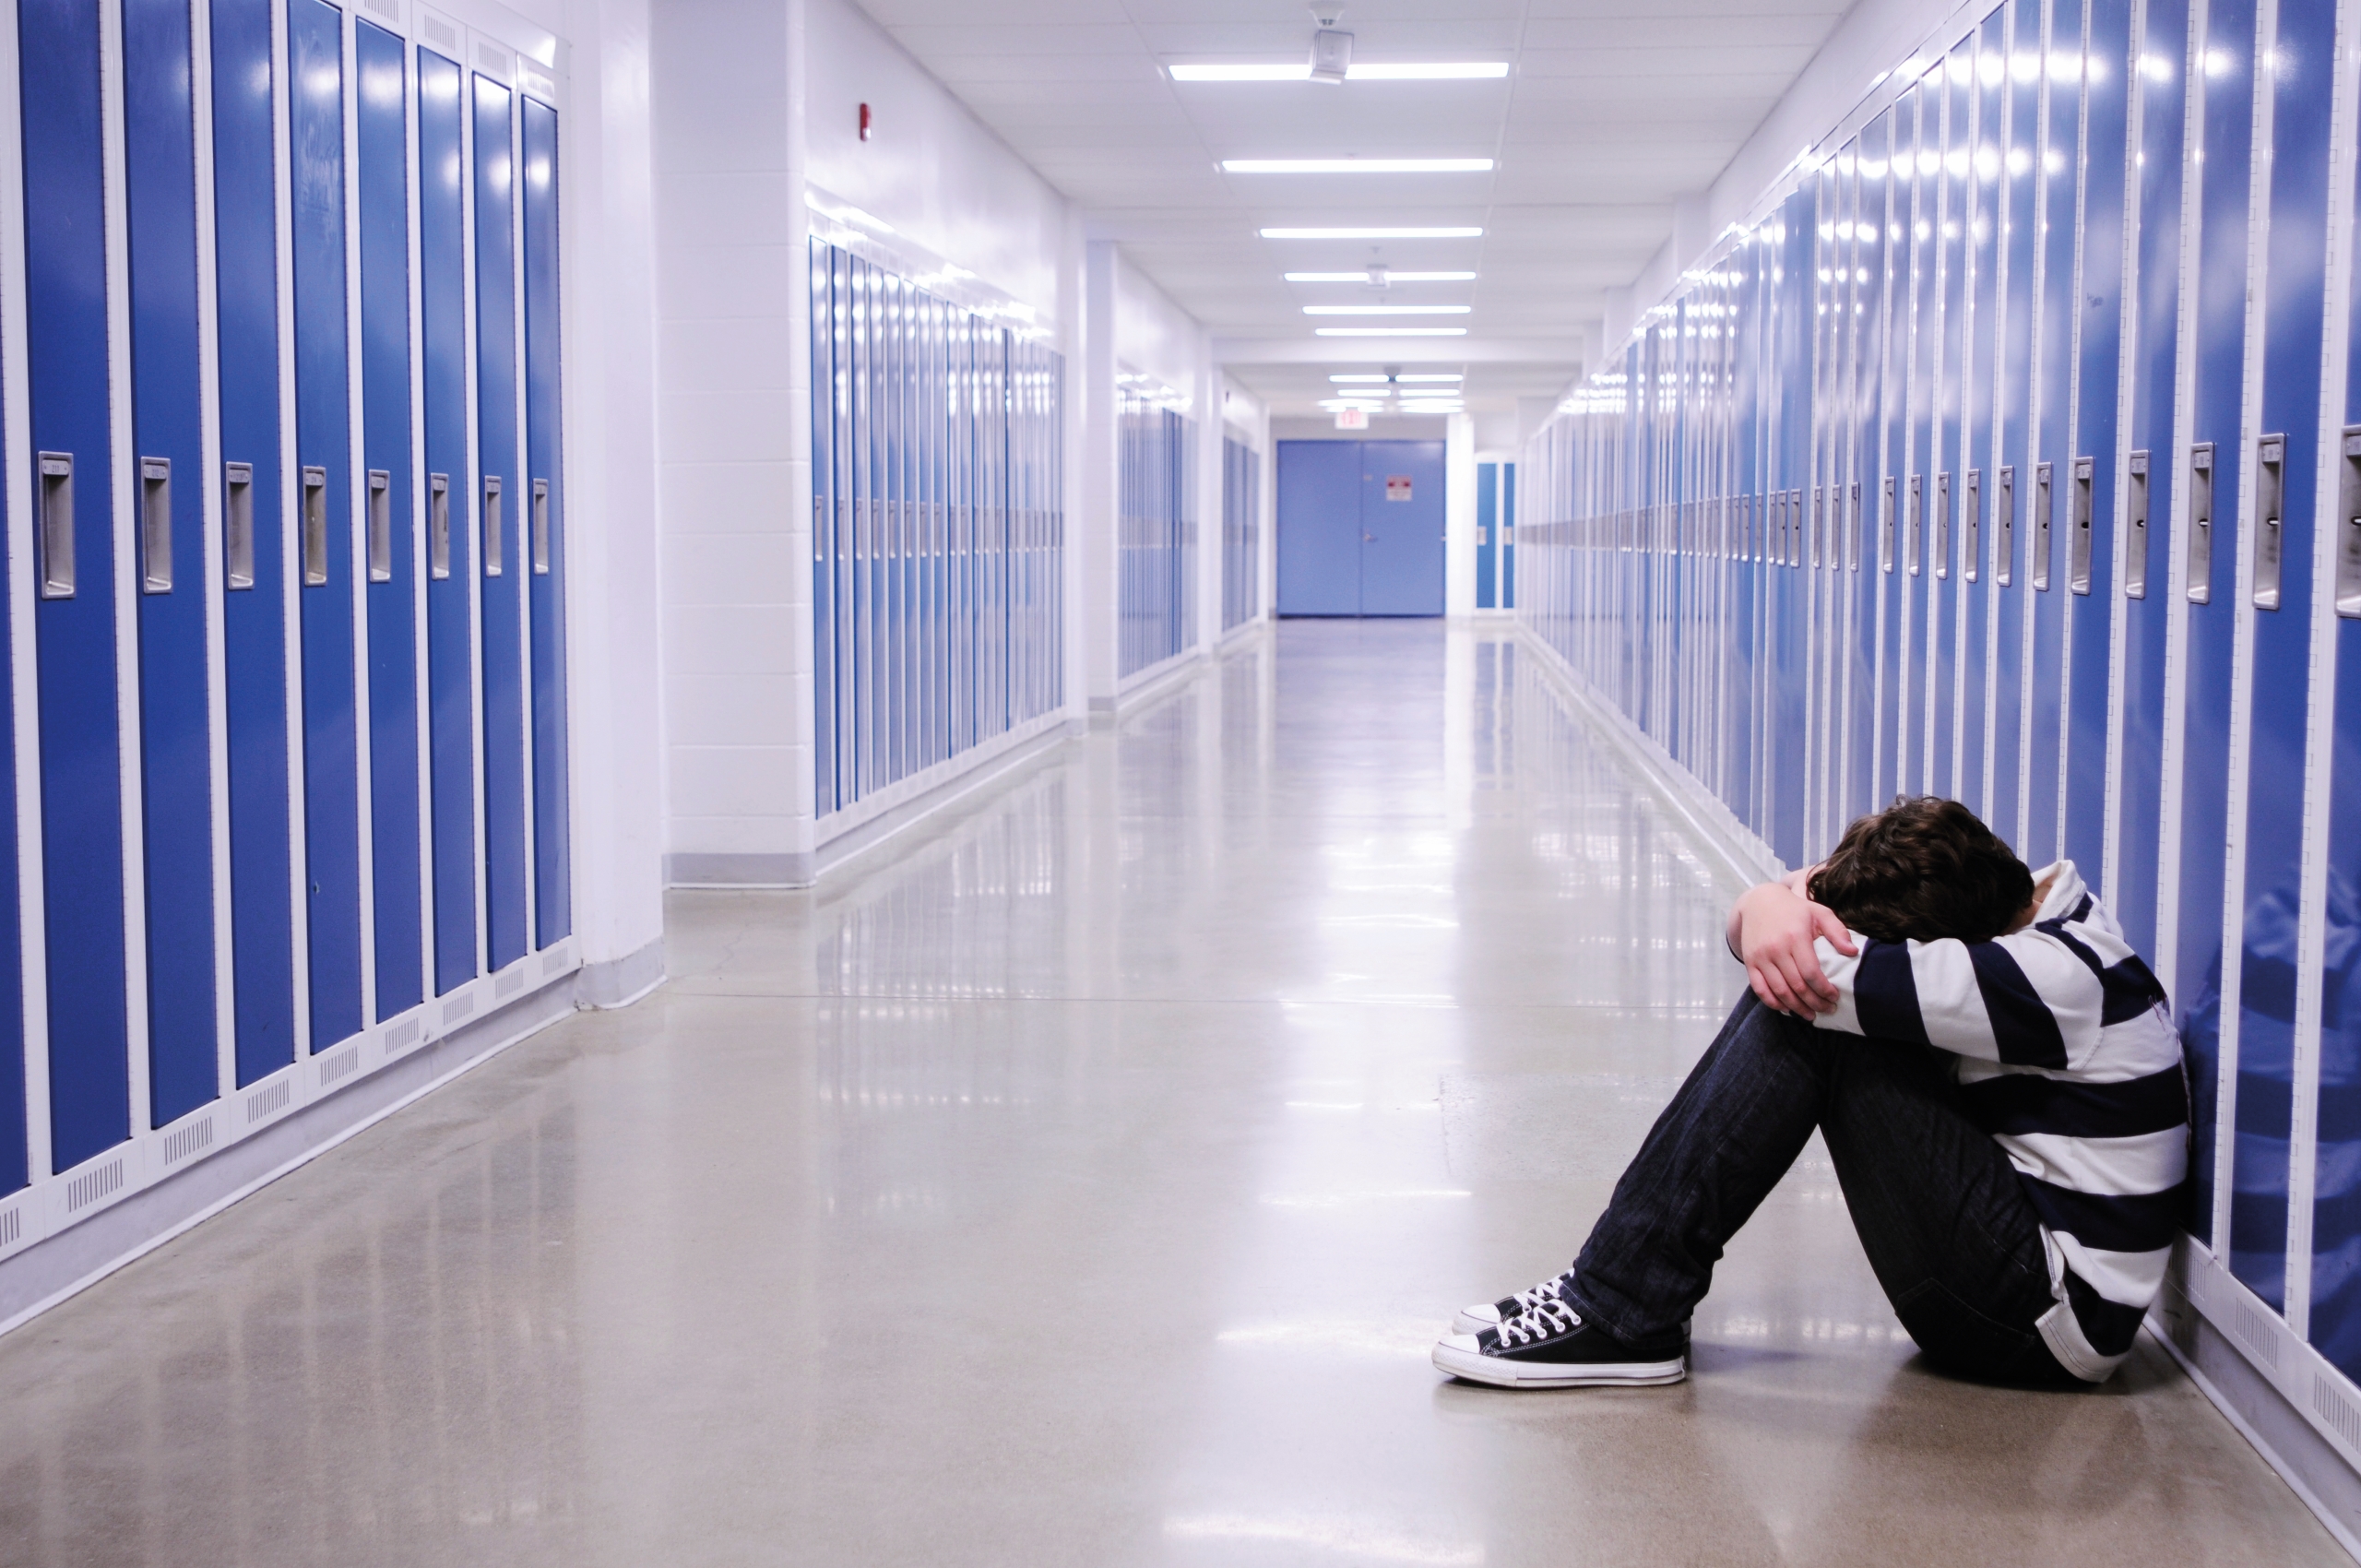 picture of a school hallway with a someone curled up sitting against the locker